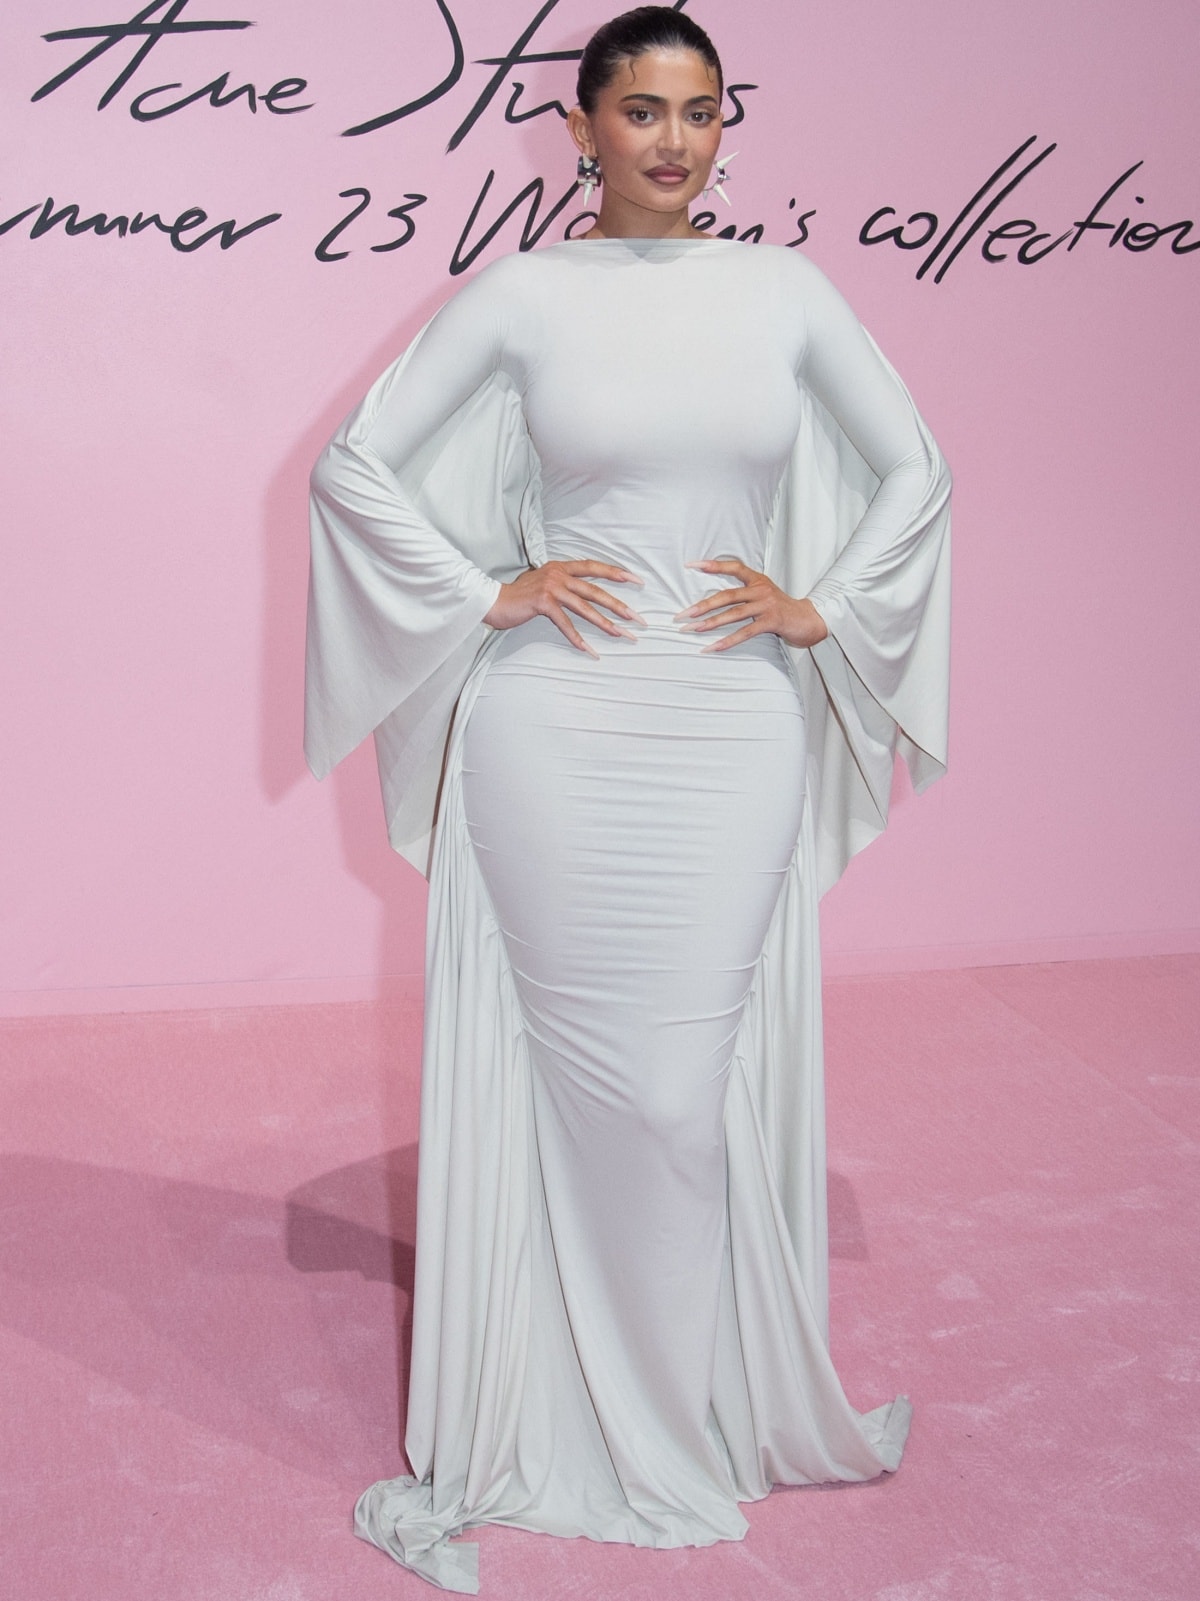 Kylie Jenner wearing a white Acne Studios Spring 2023 floor-length dress at the brand’s runway presentation during Paris Fashion Week